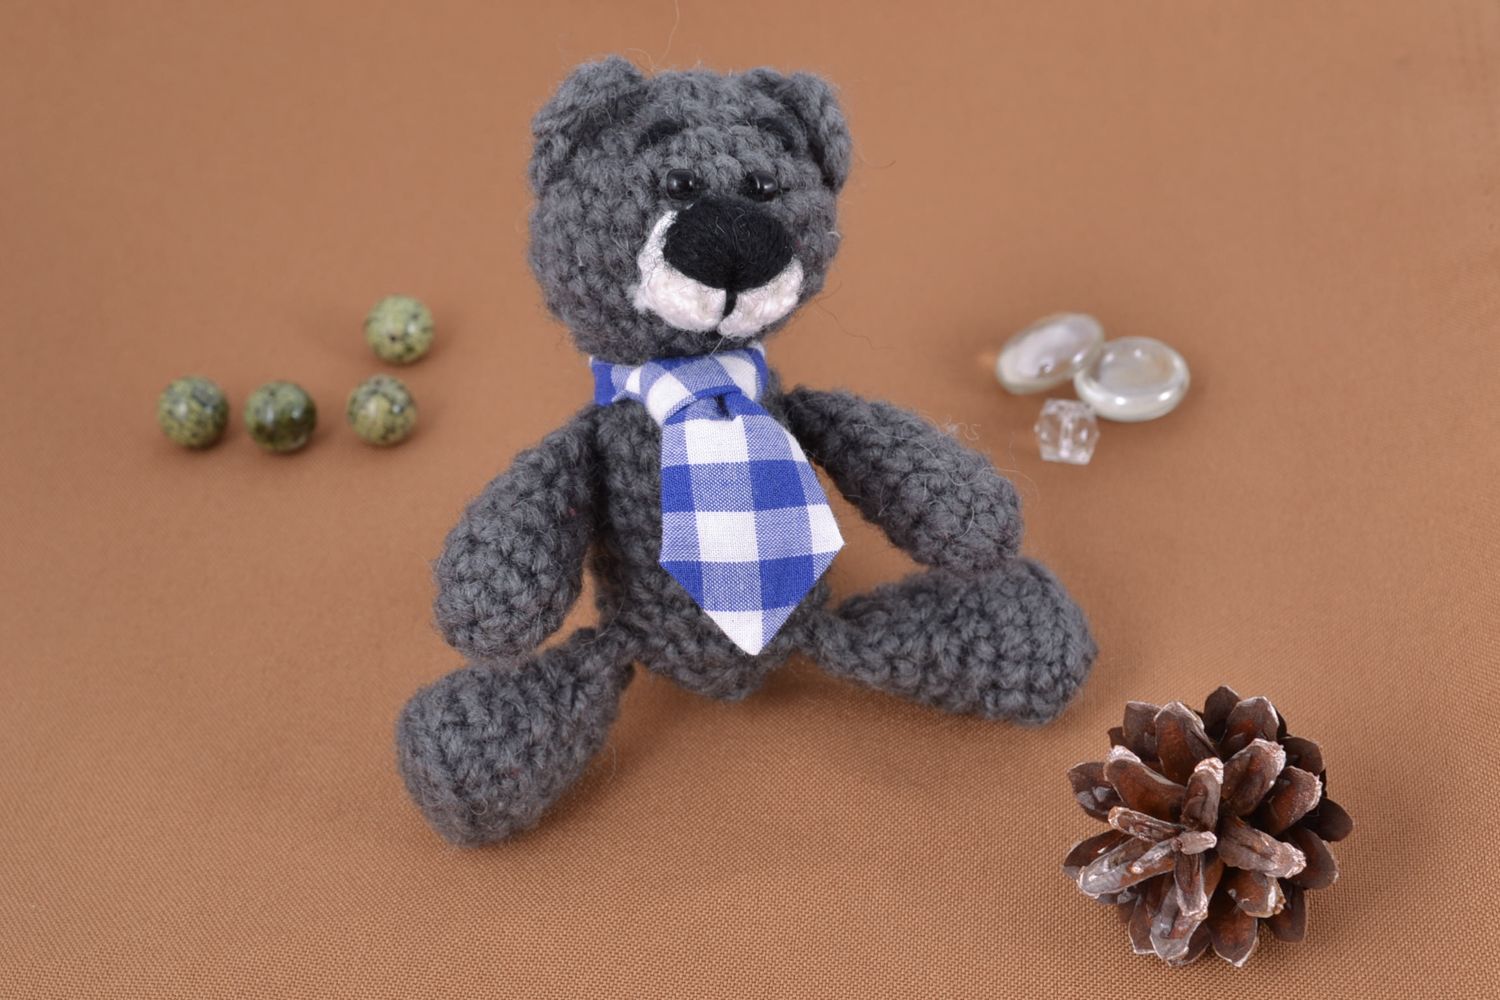 Handmade toy crocheted in the shape of bear photo 1